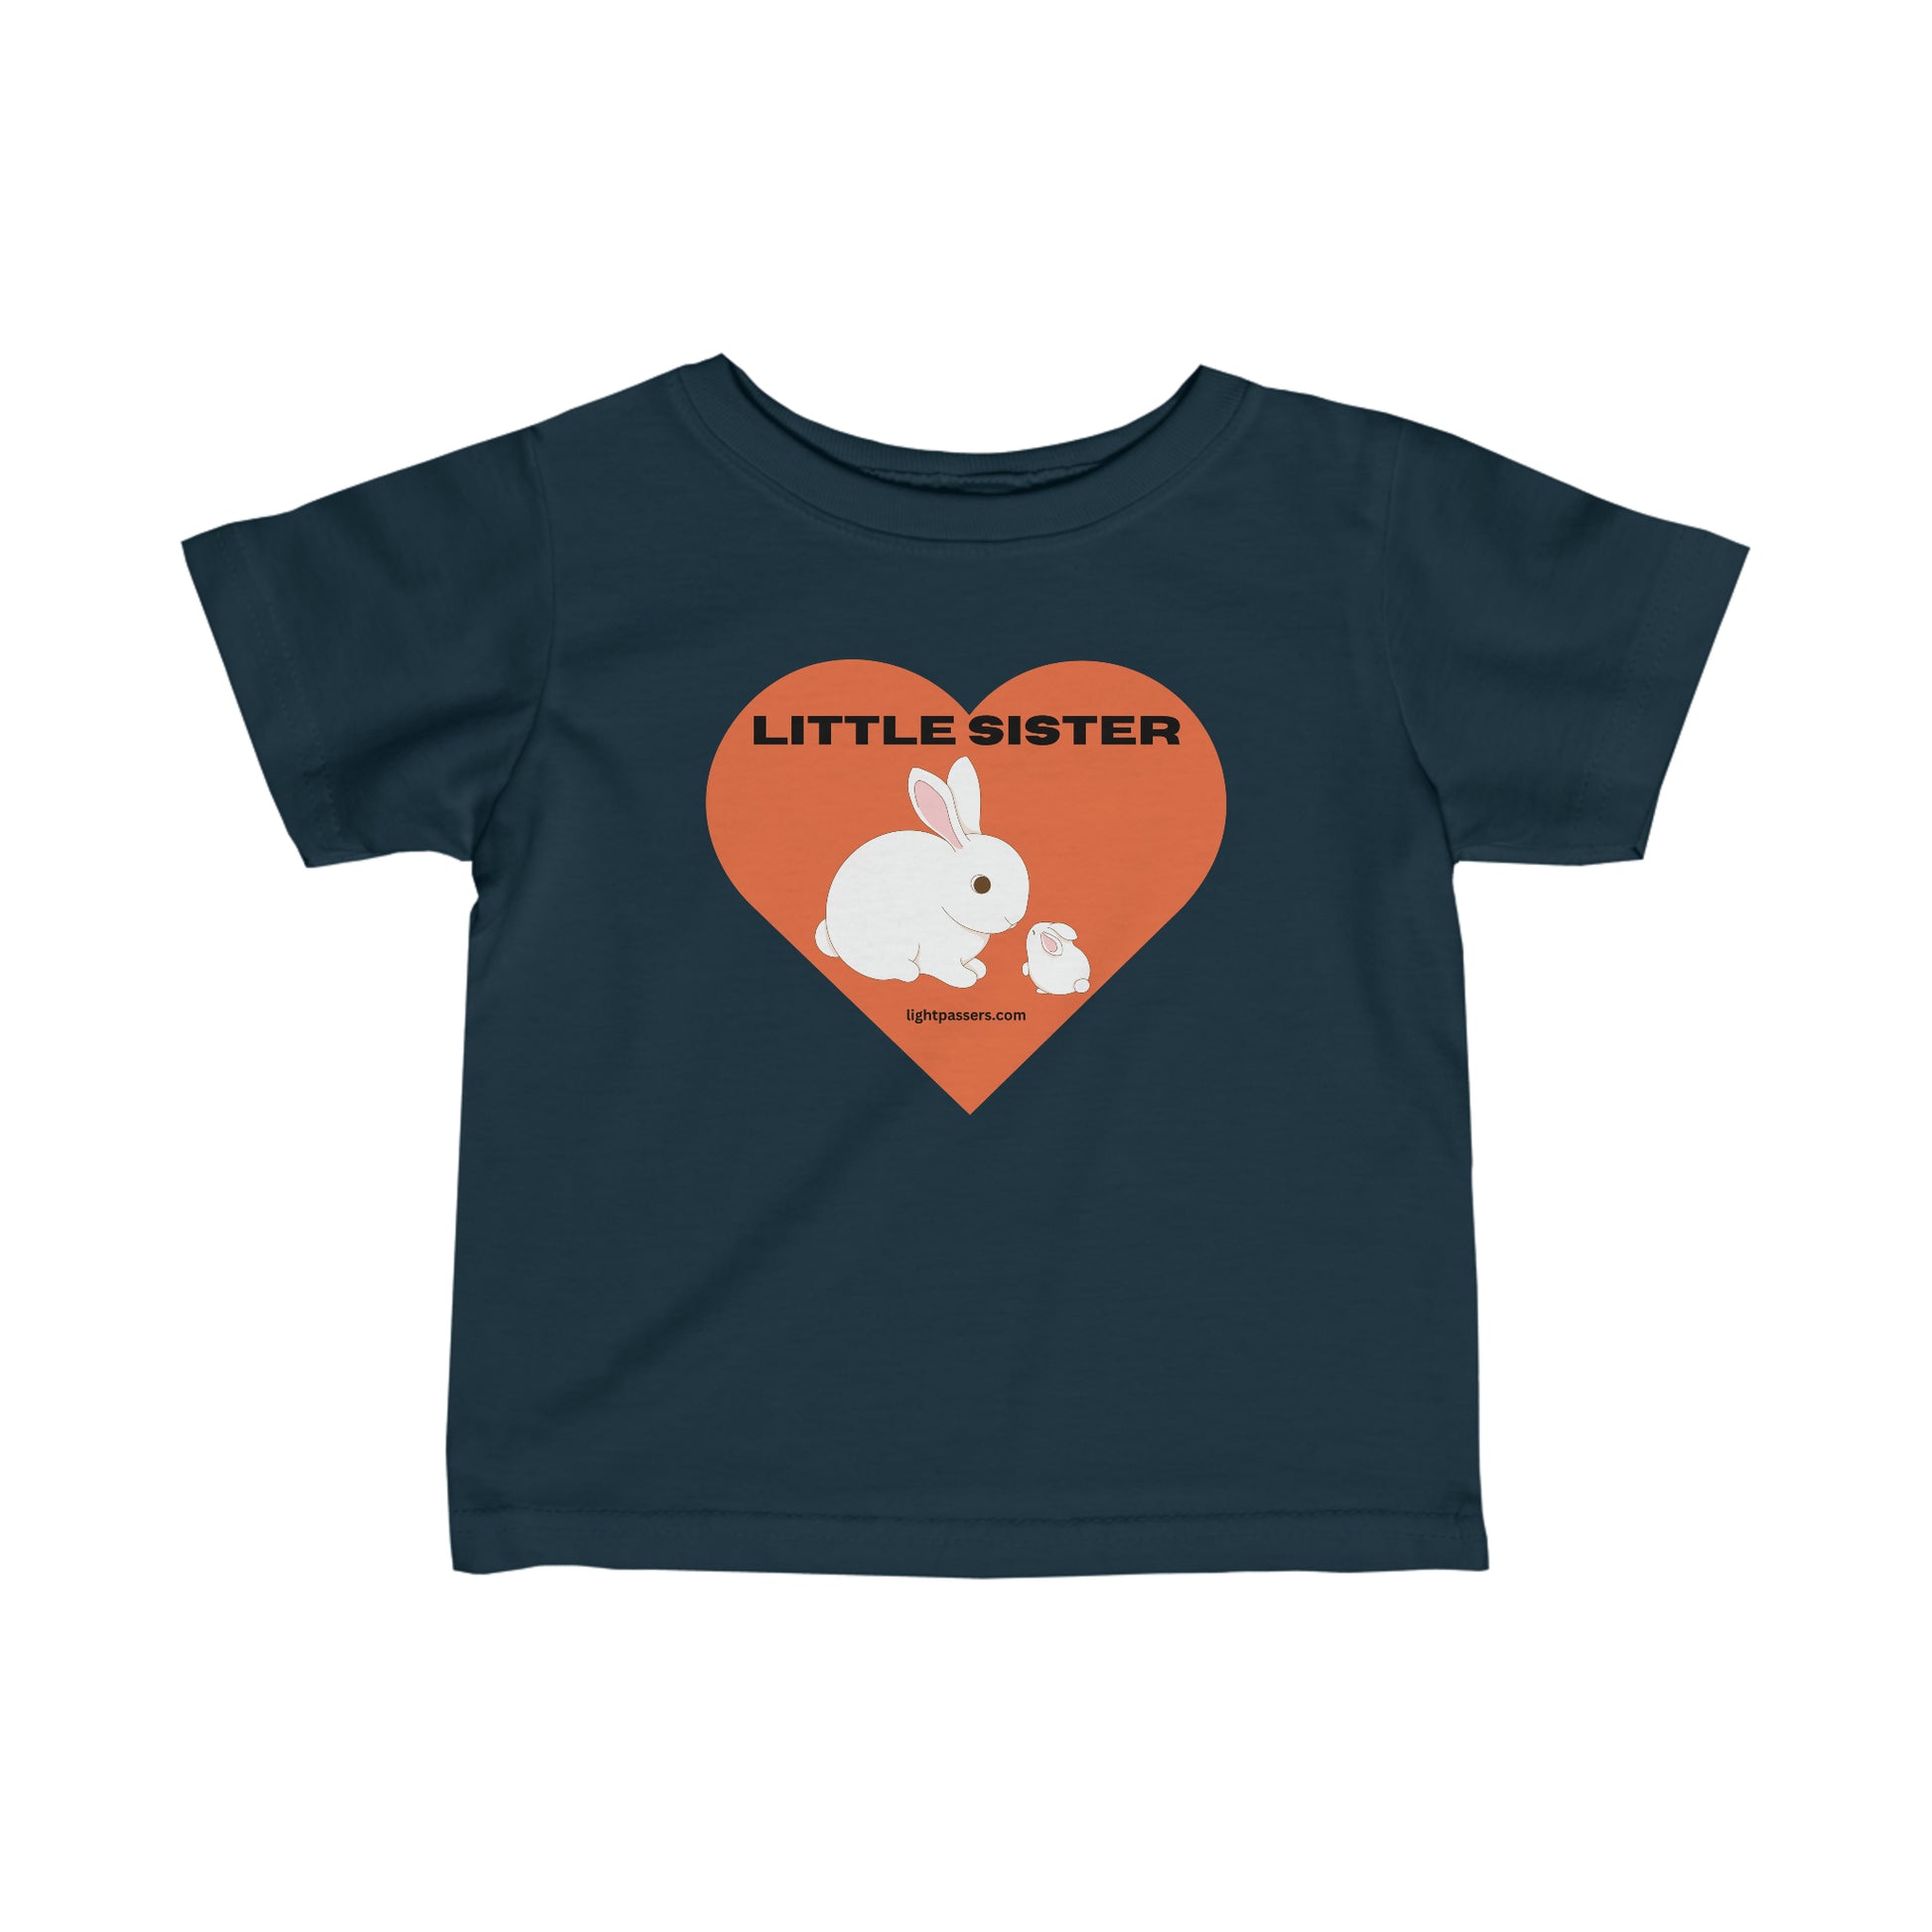 Infant fine jersey tee with a white rabbit and heart design. Side seams, ribbed knitting, and taped shoulders for durability and comfort. Little Sister Baby T-shirts.